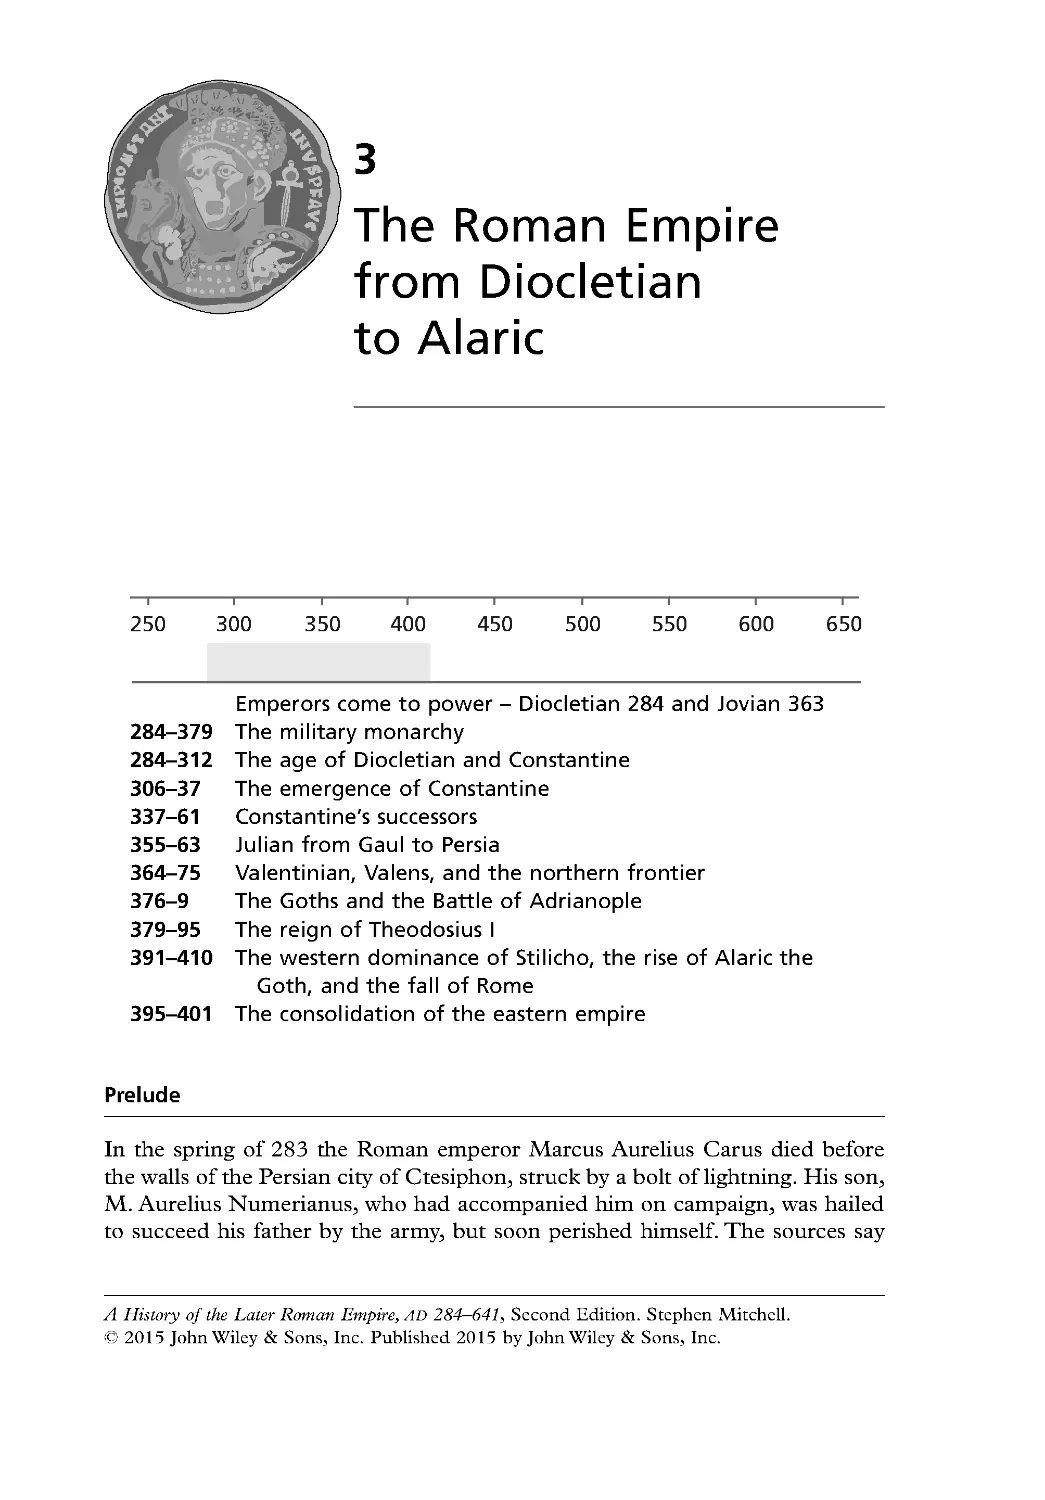 3: The Roman Empire from Diocletian to Alaric